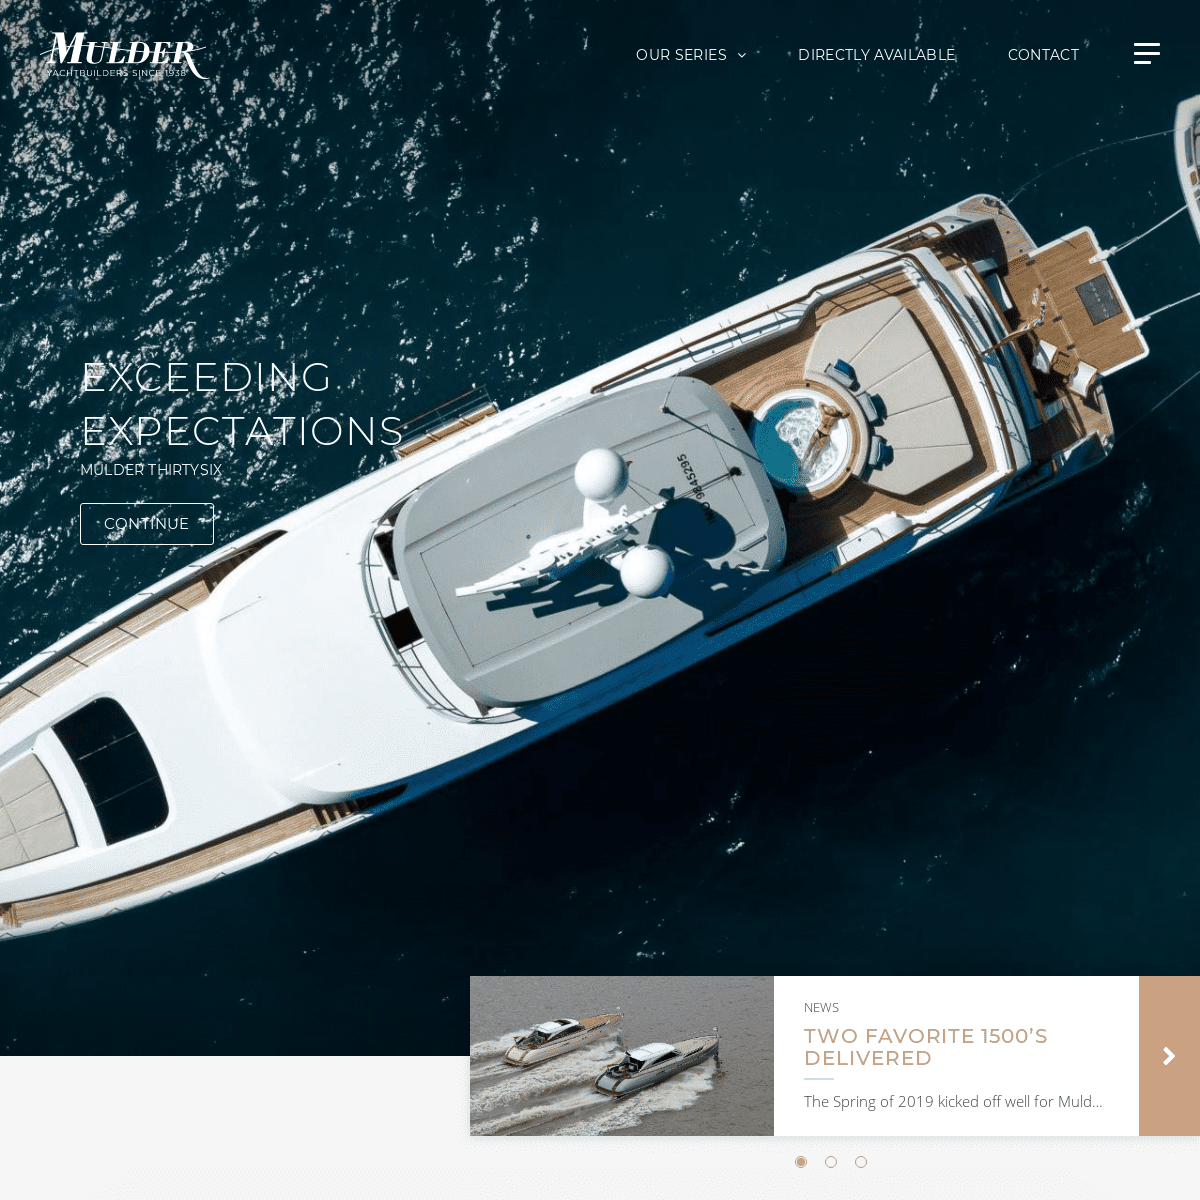 Mulder Shipyard | Dutch Yachtbuilders since 1938 from 13 to 45 meters